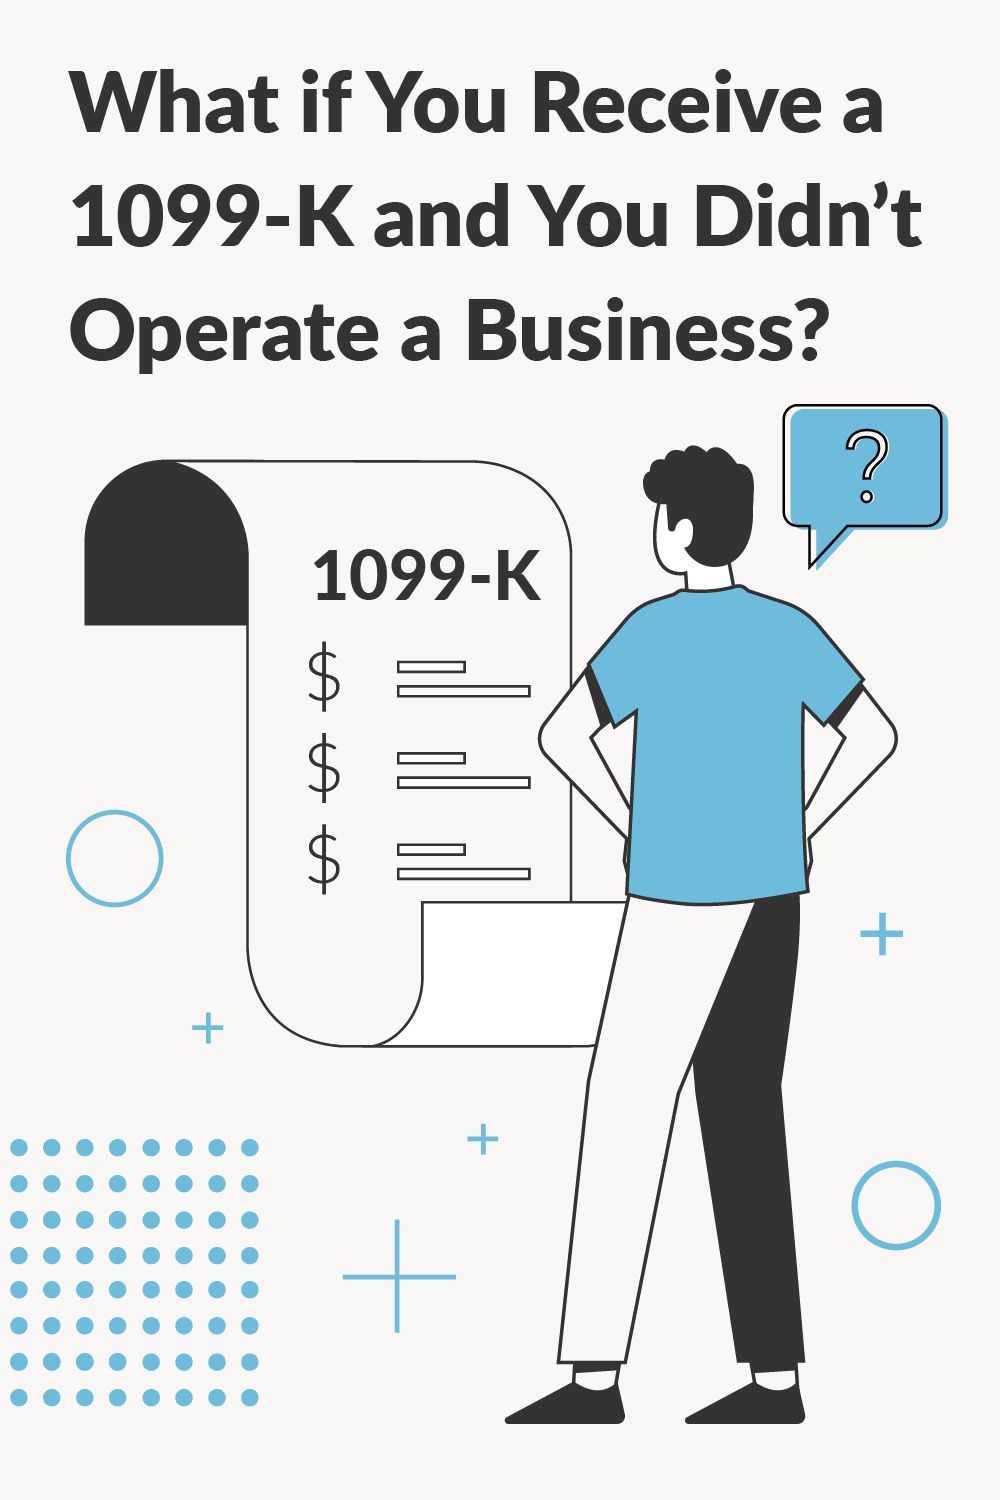 what if you receive a 1099-k and you didn't operate a business pinterest image